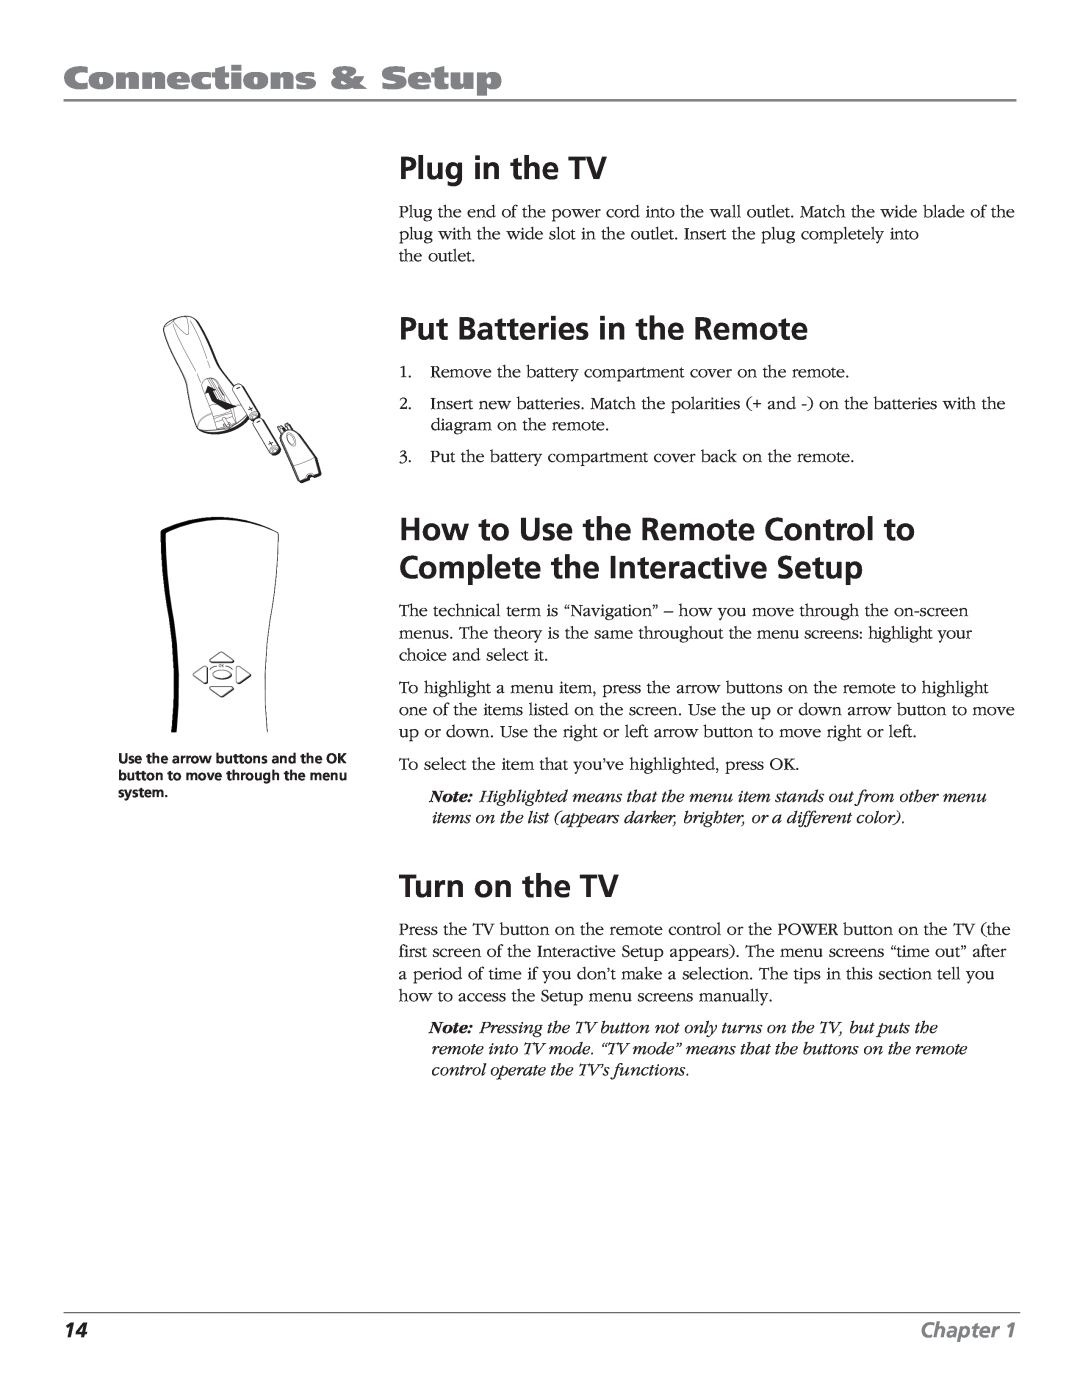 RCA F27669 Plug in the TV, Put Batteries in the Remote, How to Use the Remote Control to Complete the Interactive Setup 